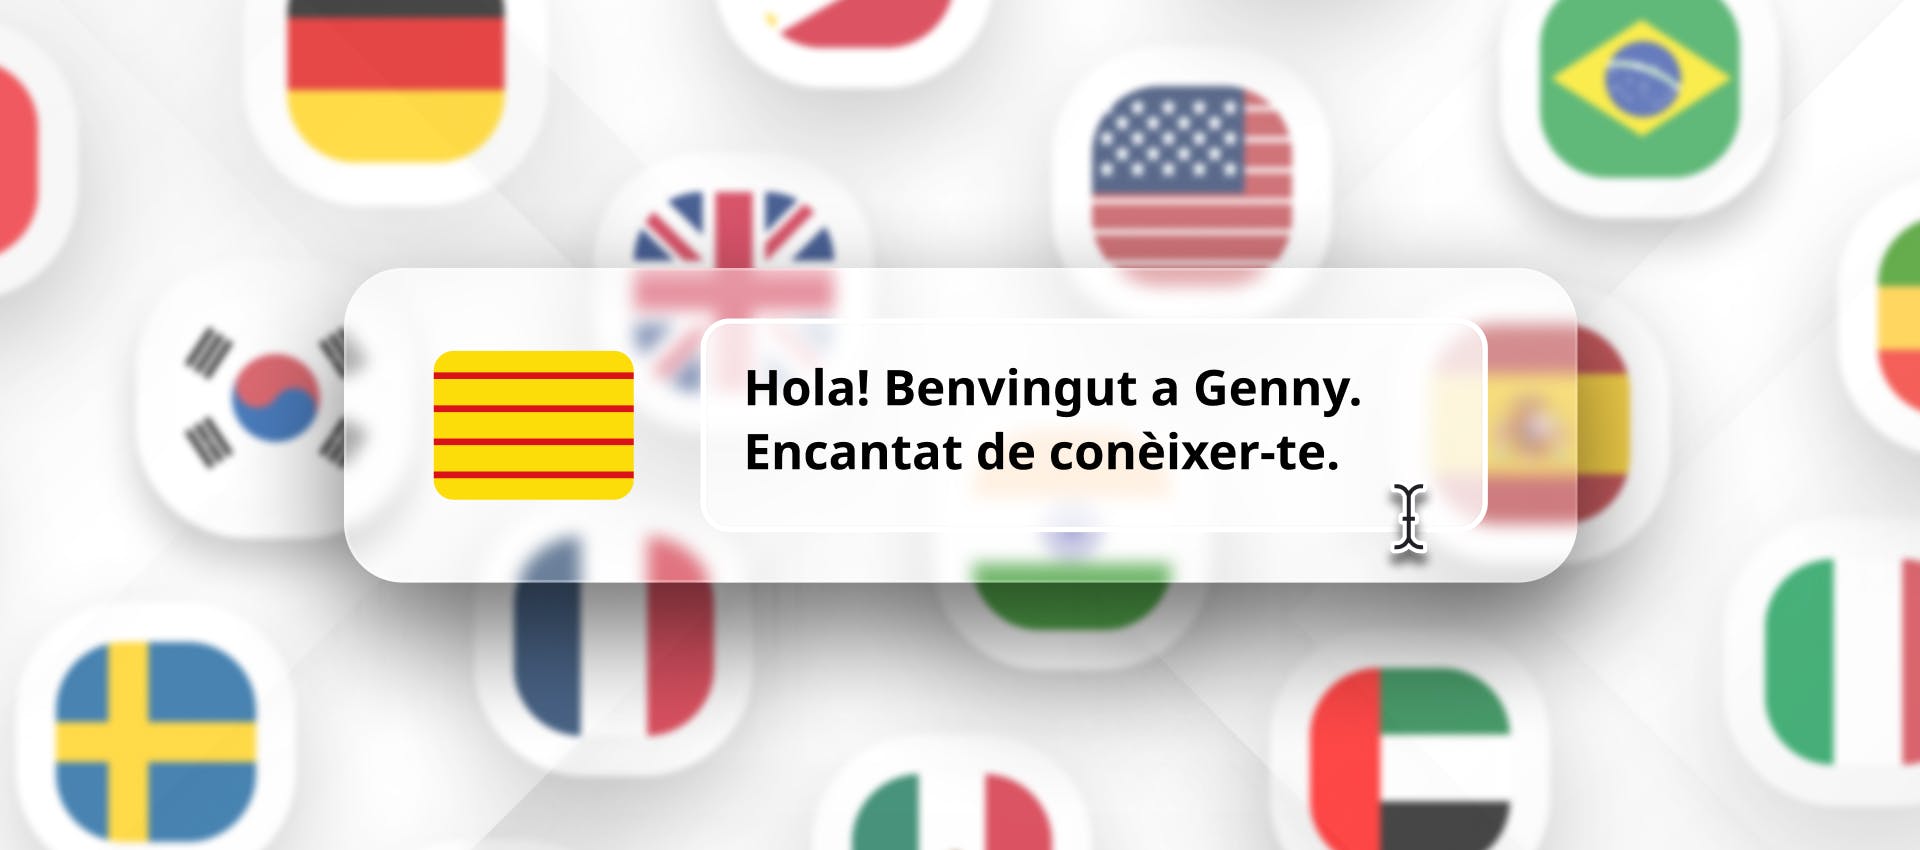 Catalan phrase for Catalan TTS generation with different flags in the background